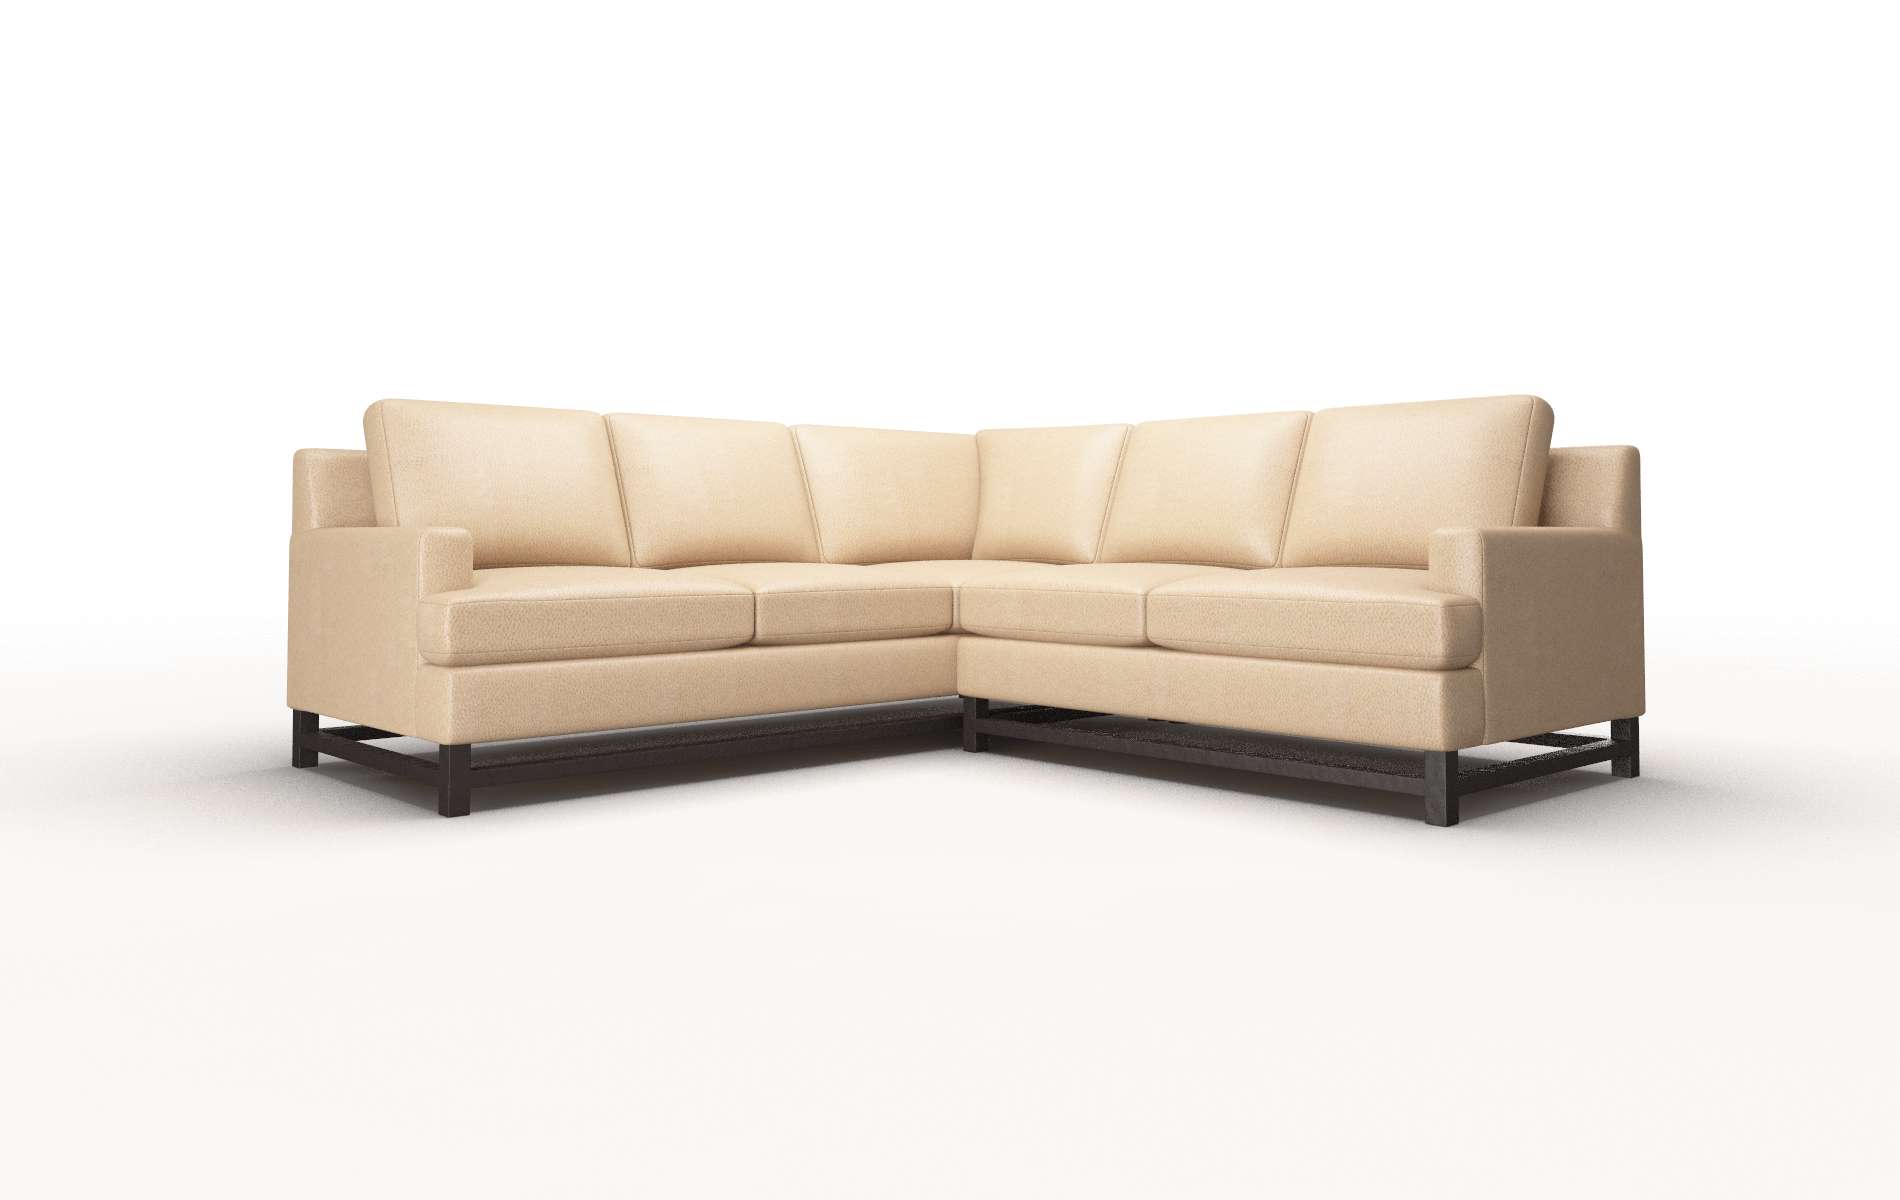 Houston Ford Dune Sectional espresso legs 1